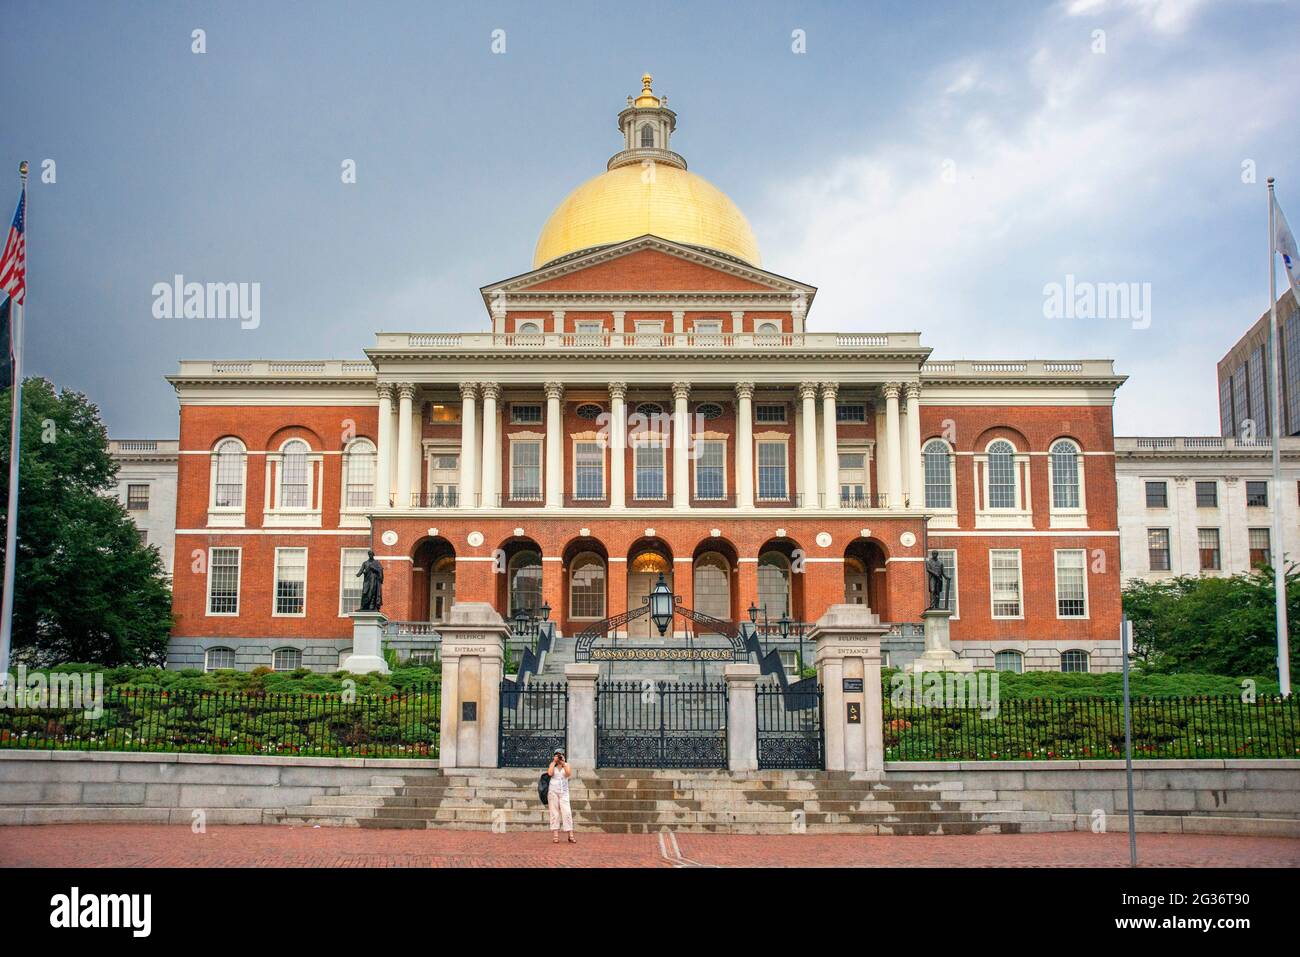 Massachusetts State House the seat of Government, with golden dome and columns in the city of Boston, USA.  The Massachusetts State House, also known Stock Photo